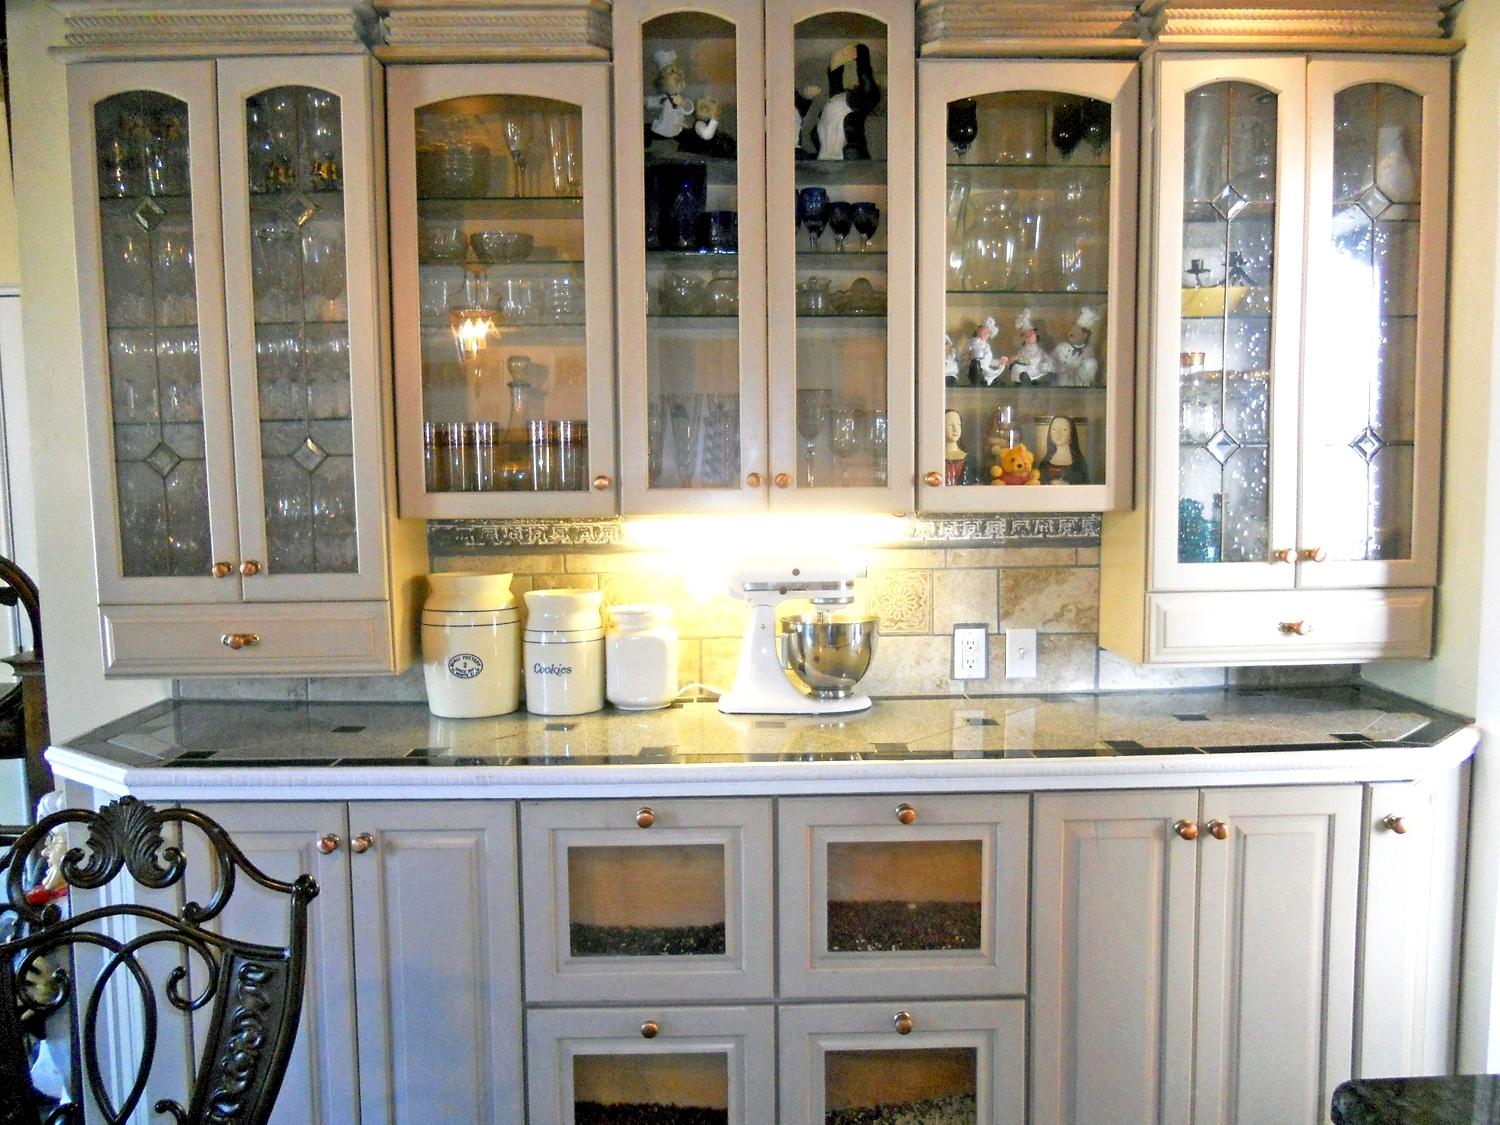 Kitchen cabinets with glass doors MOMLFLB